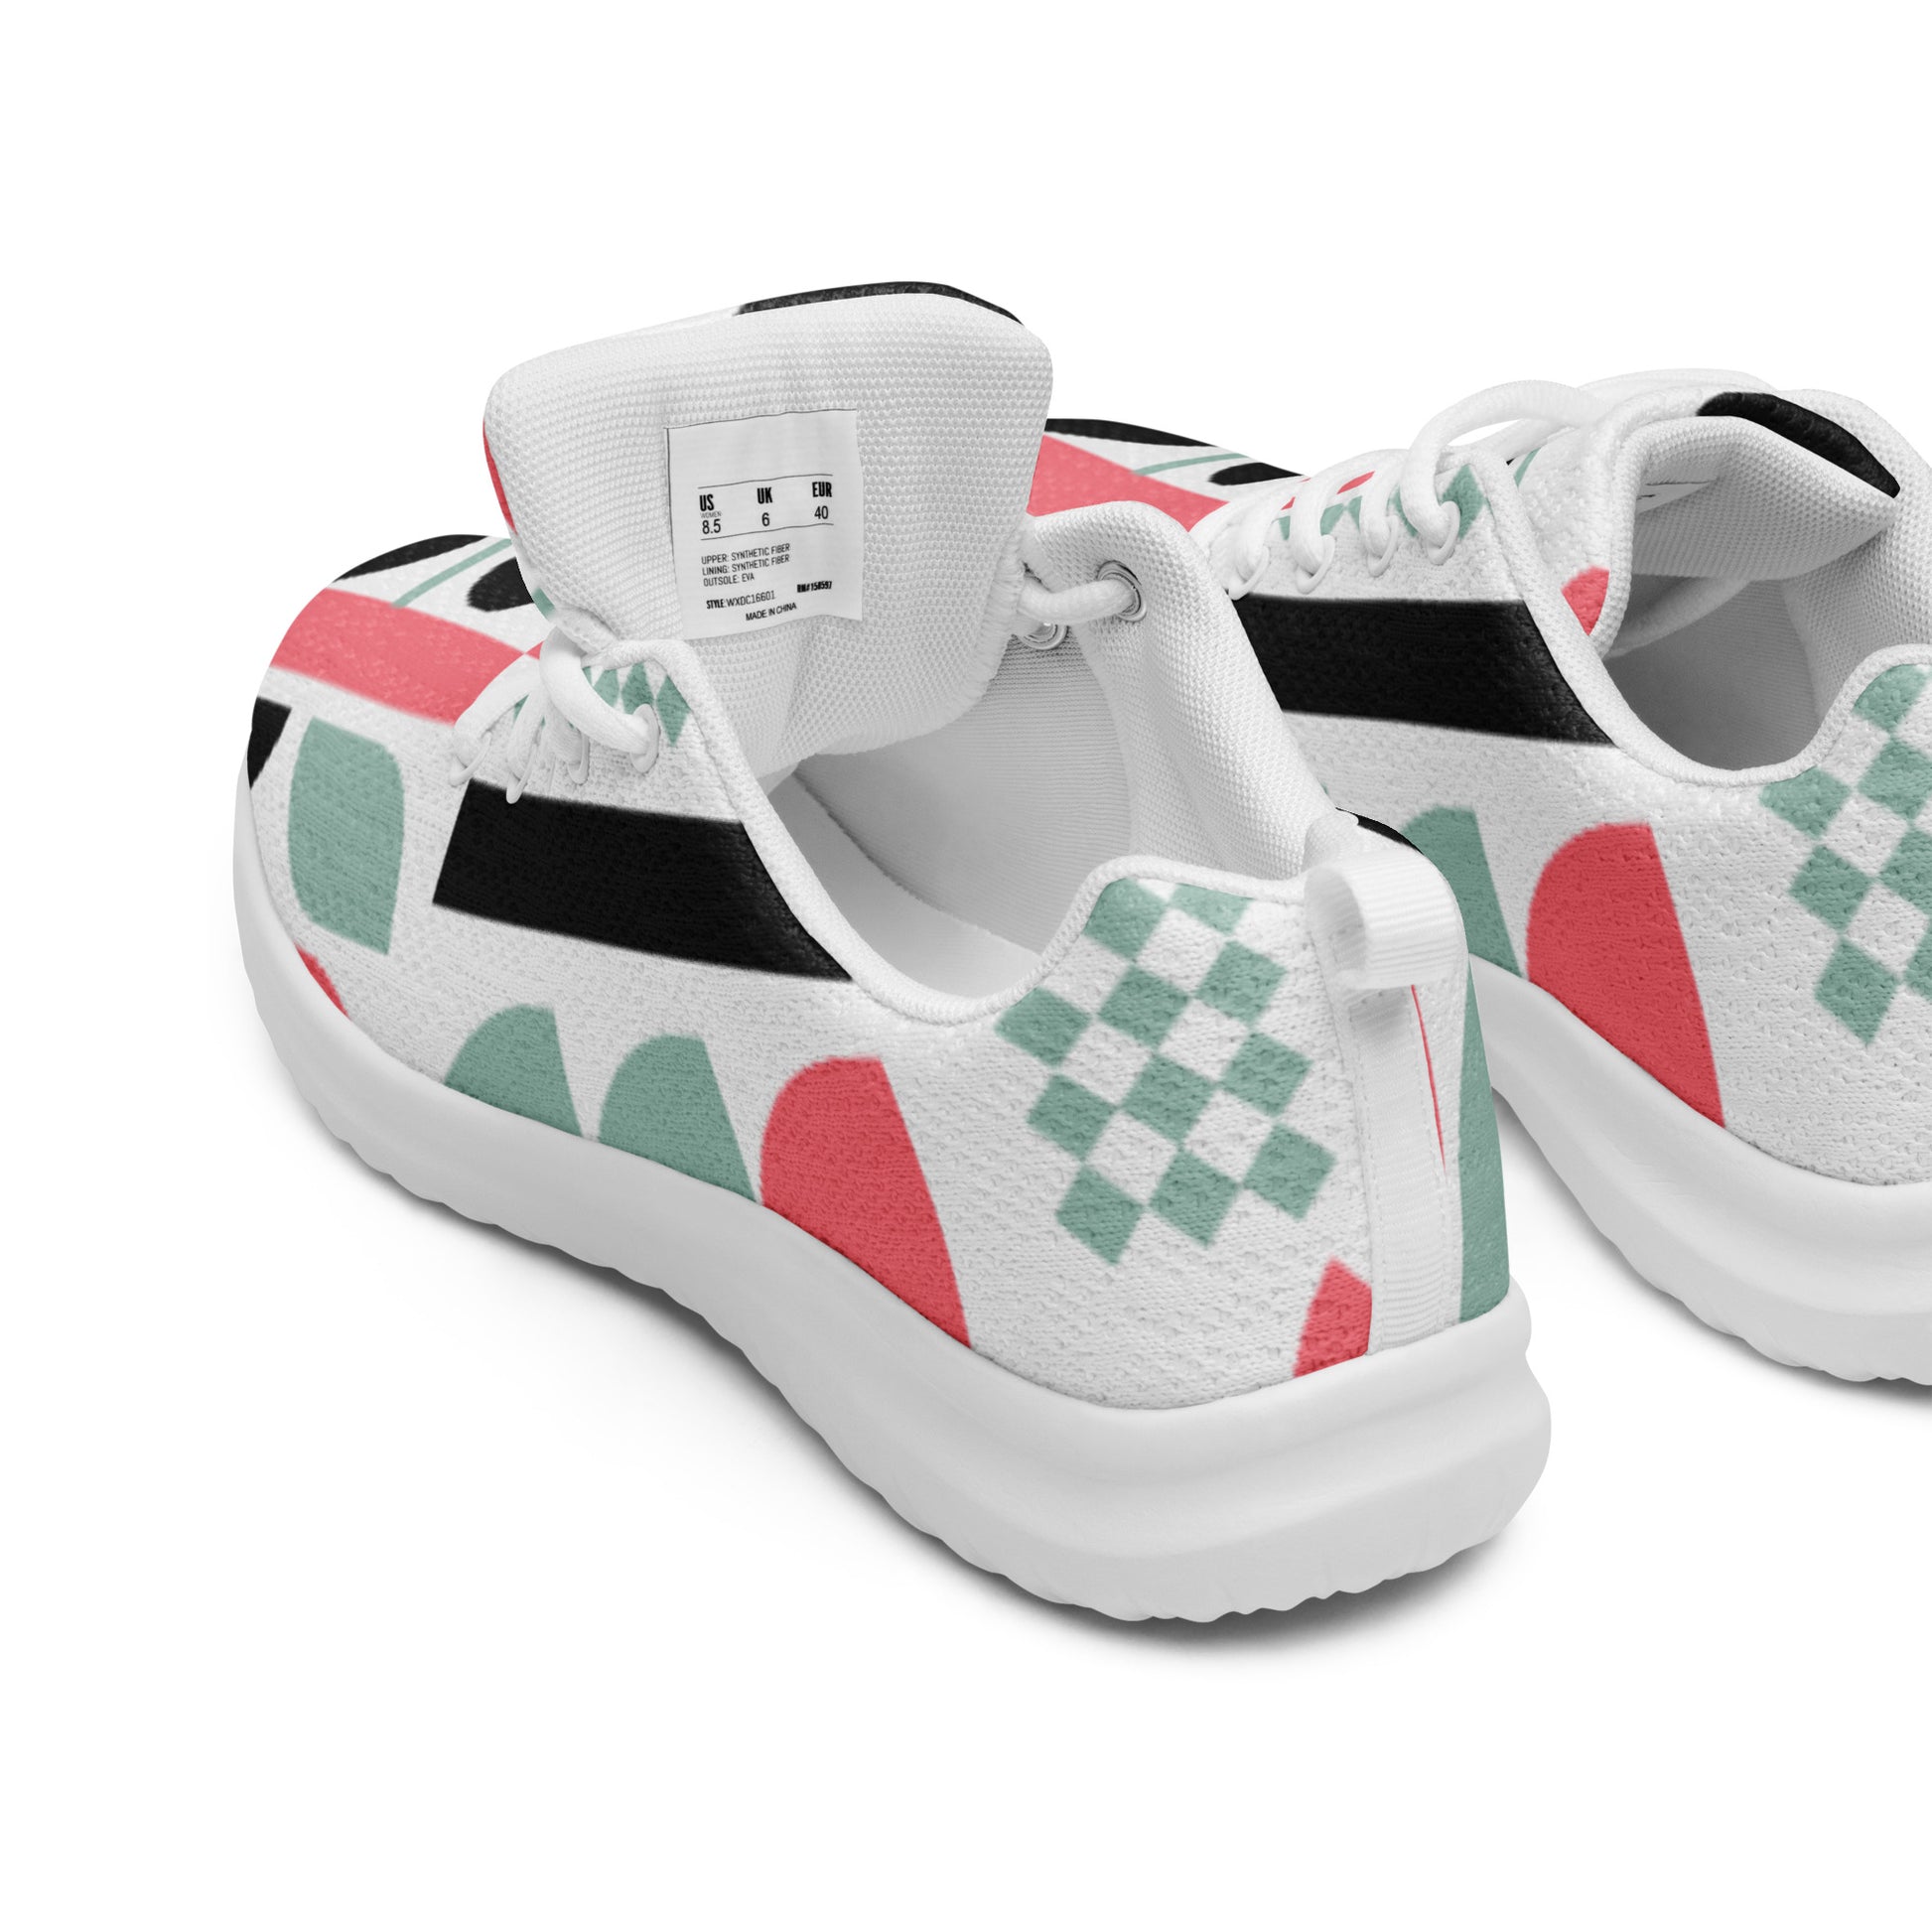 Pink Geometric - Women’s athletic shoes Womens Athletic Shoes